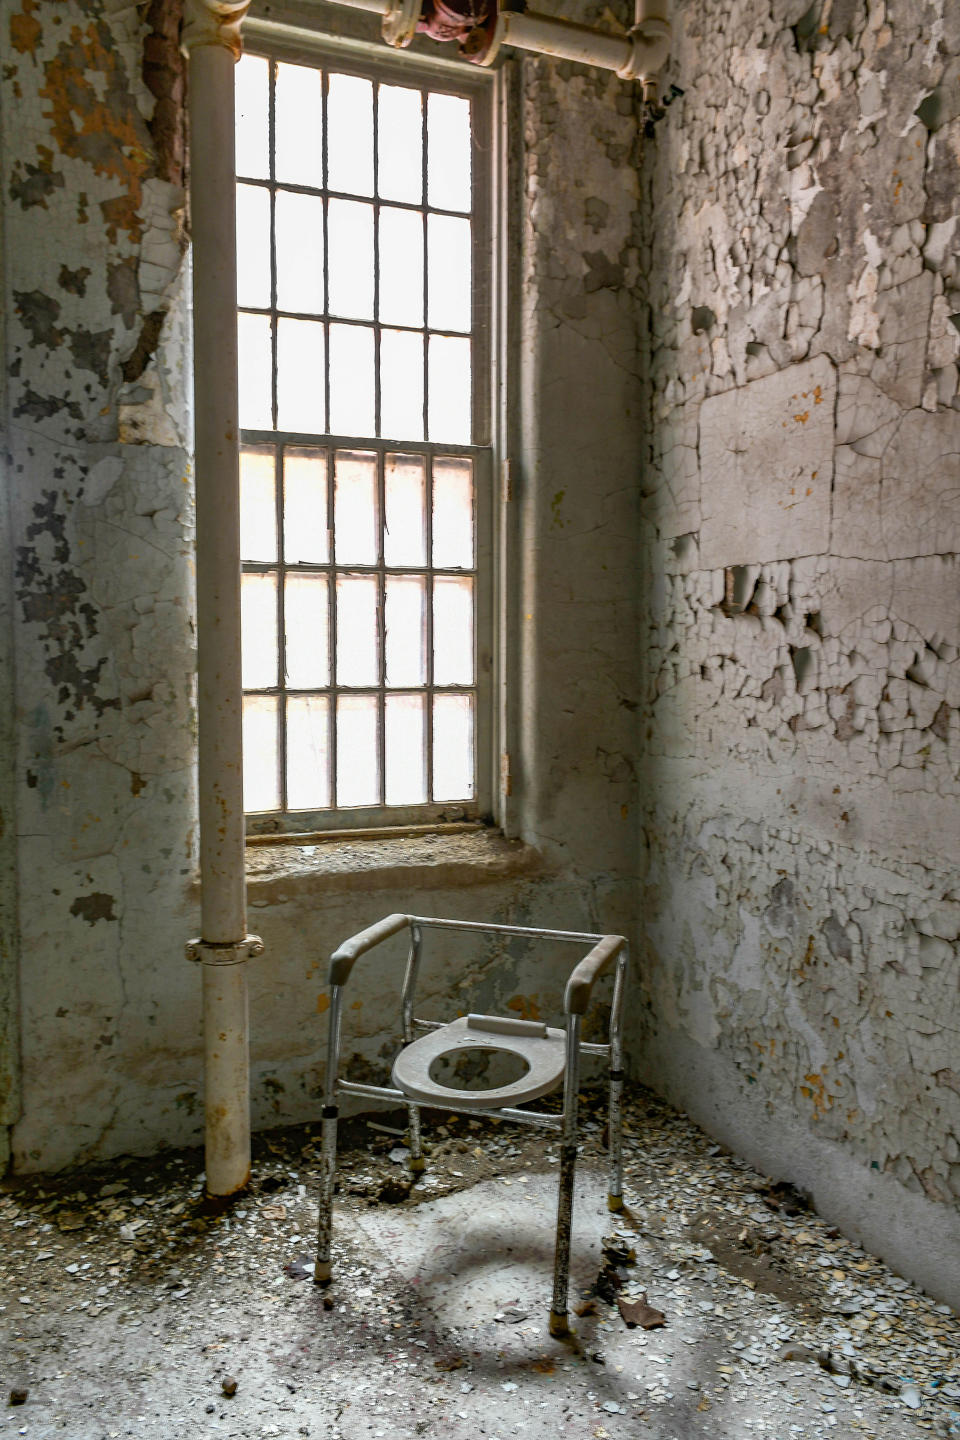 A old commode in a psychiatric hospital